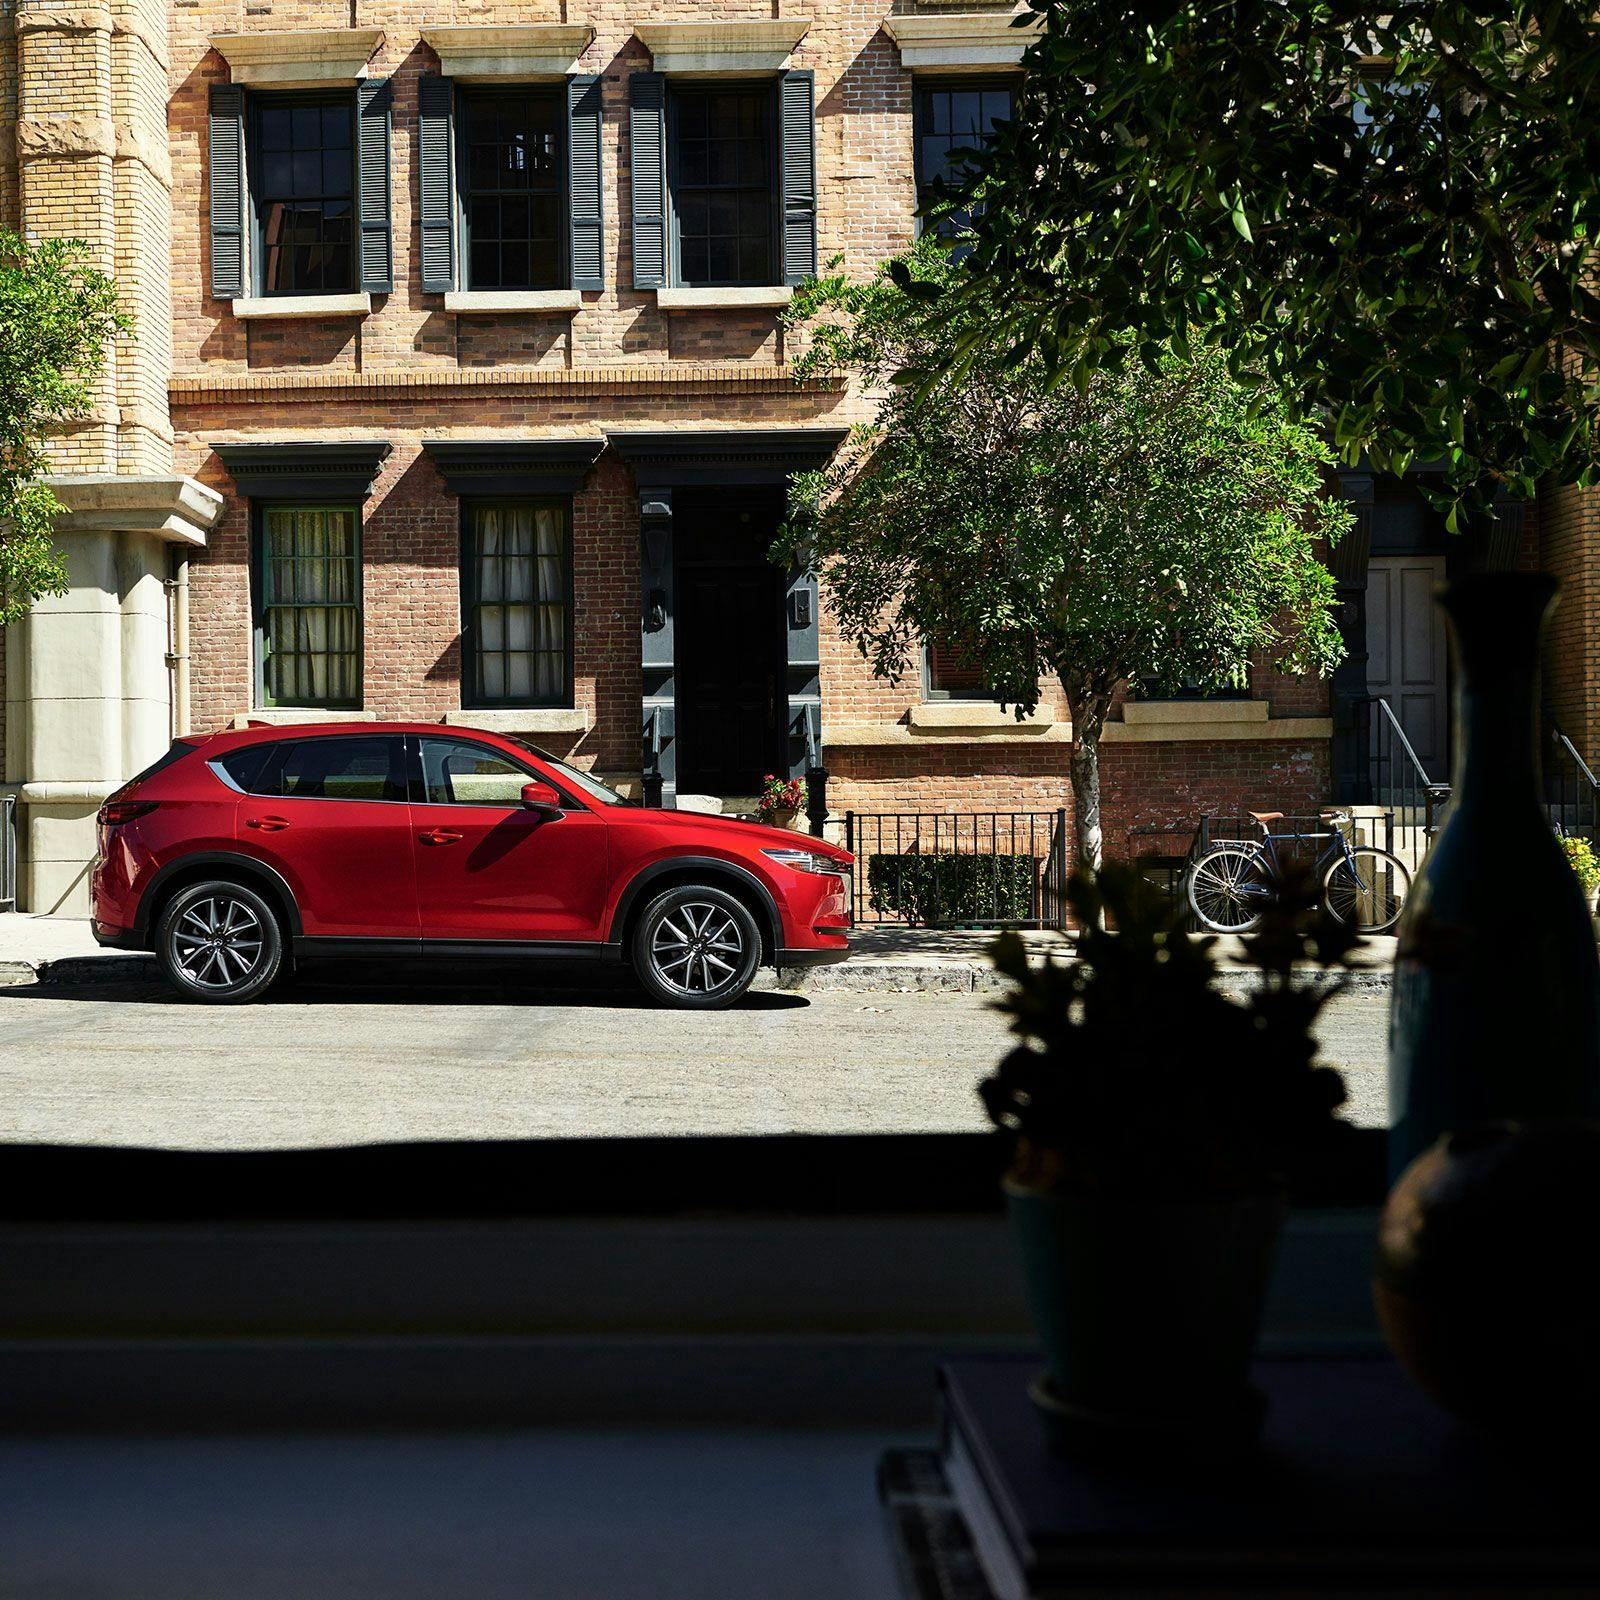 Who Would Buy the Mazda CX-5?